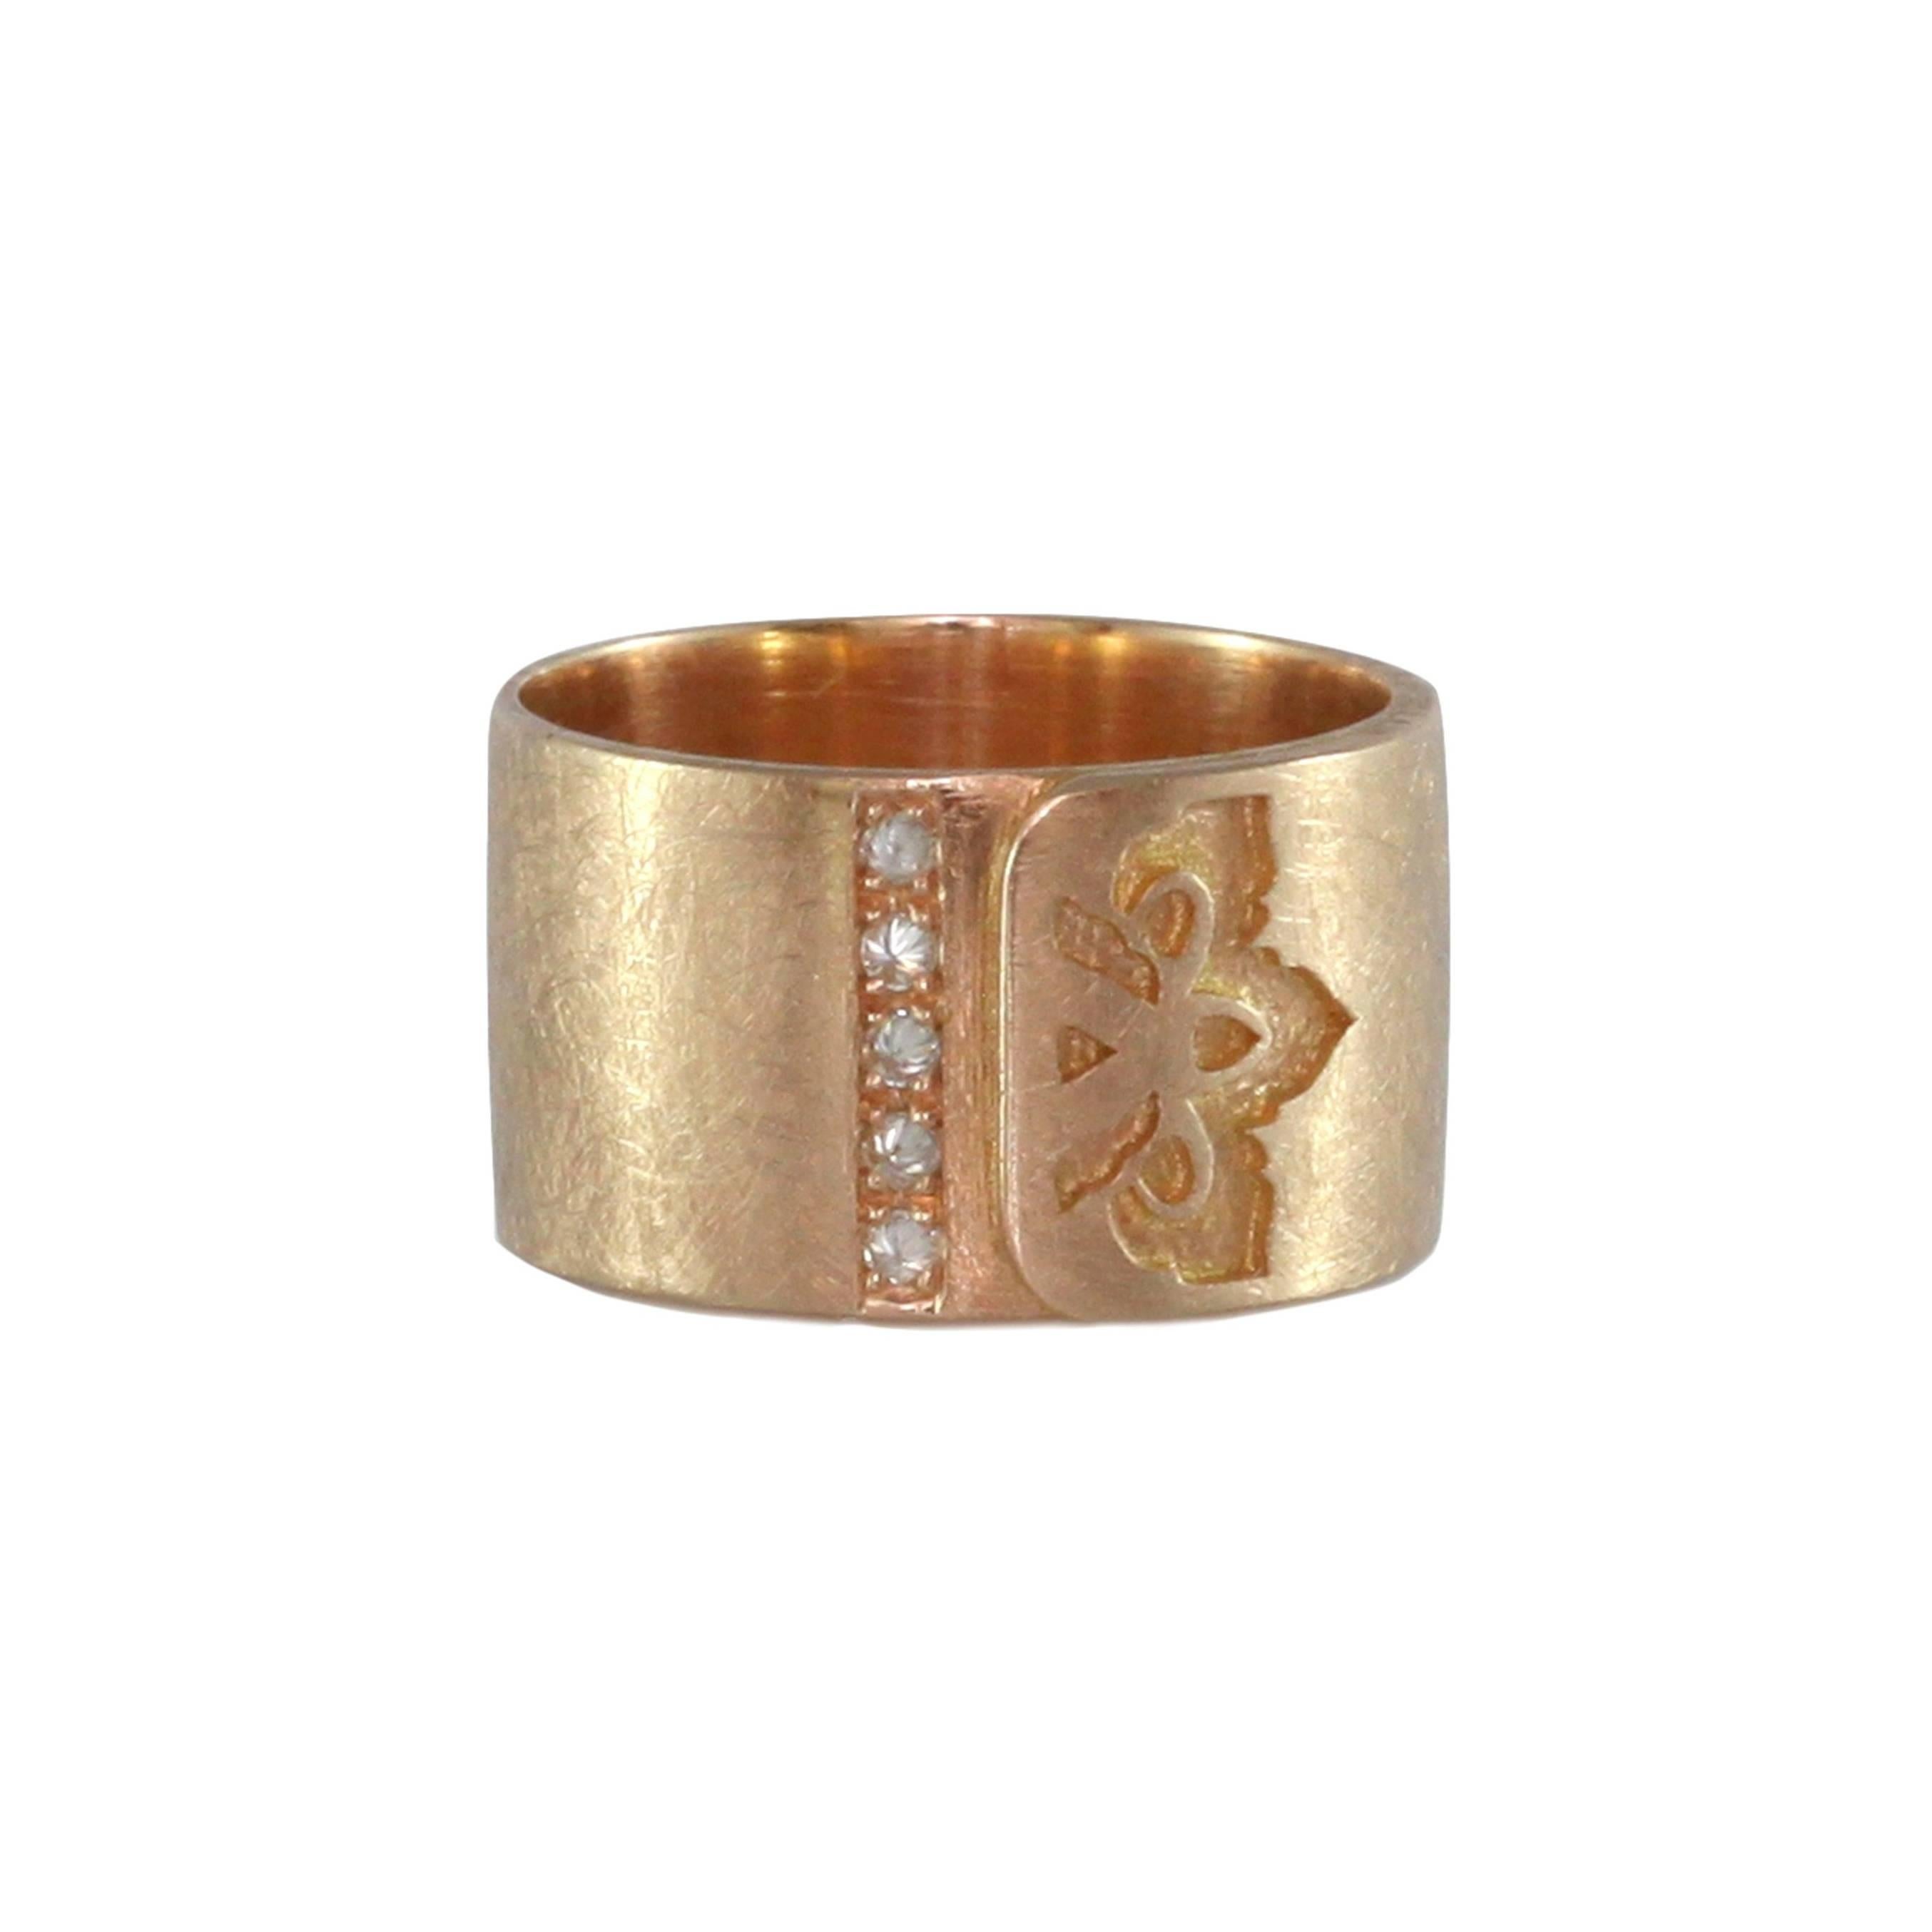 Contemporary Luca Jouel Diamond Ikon Ring in Rose Gold